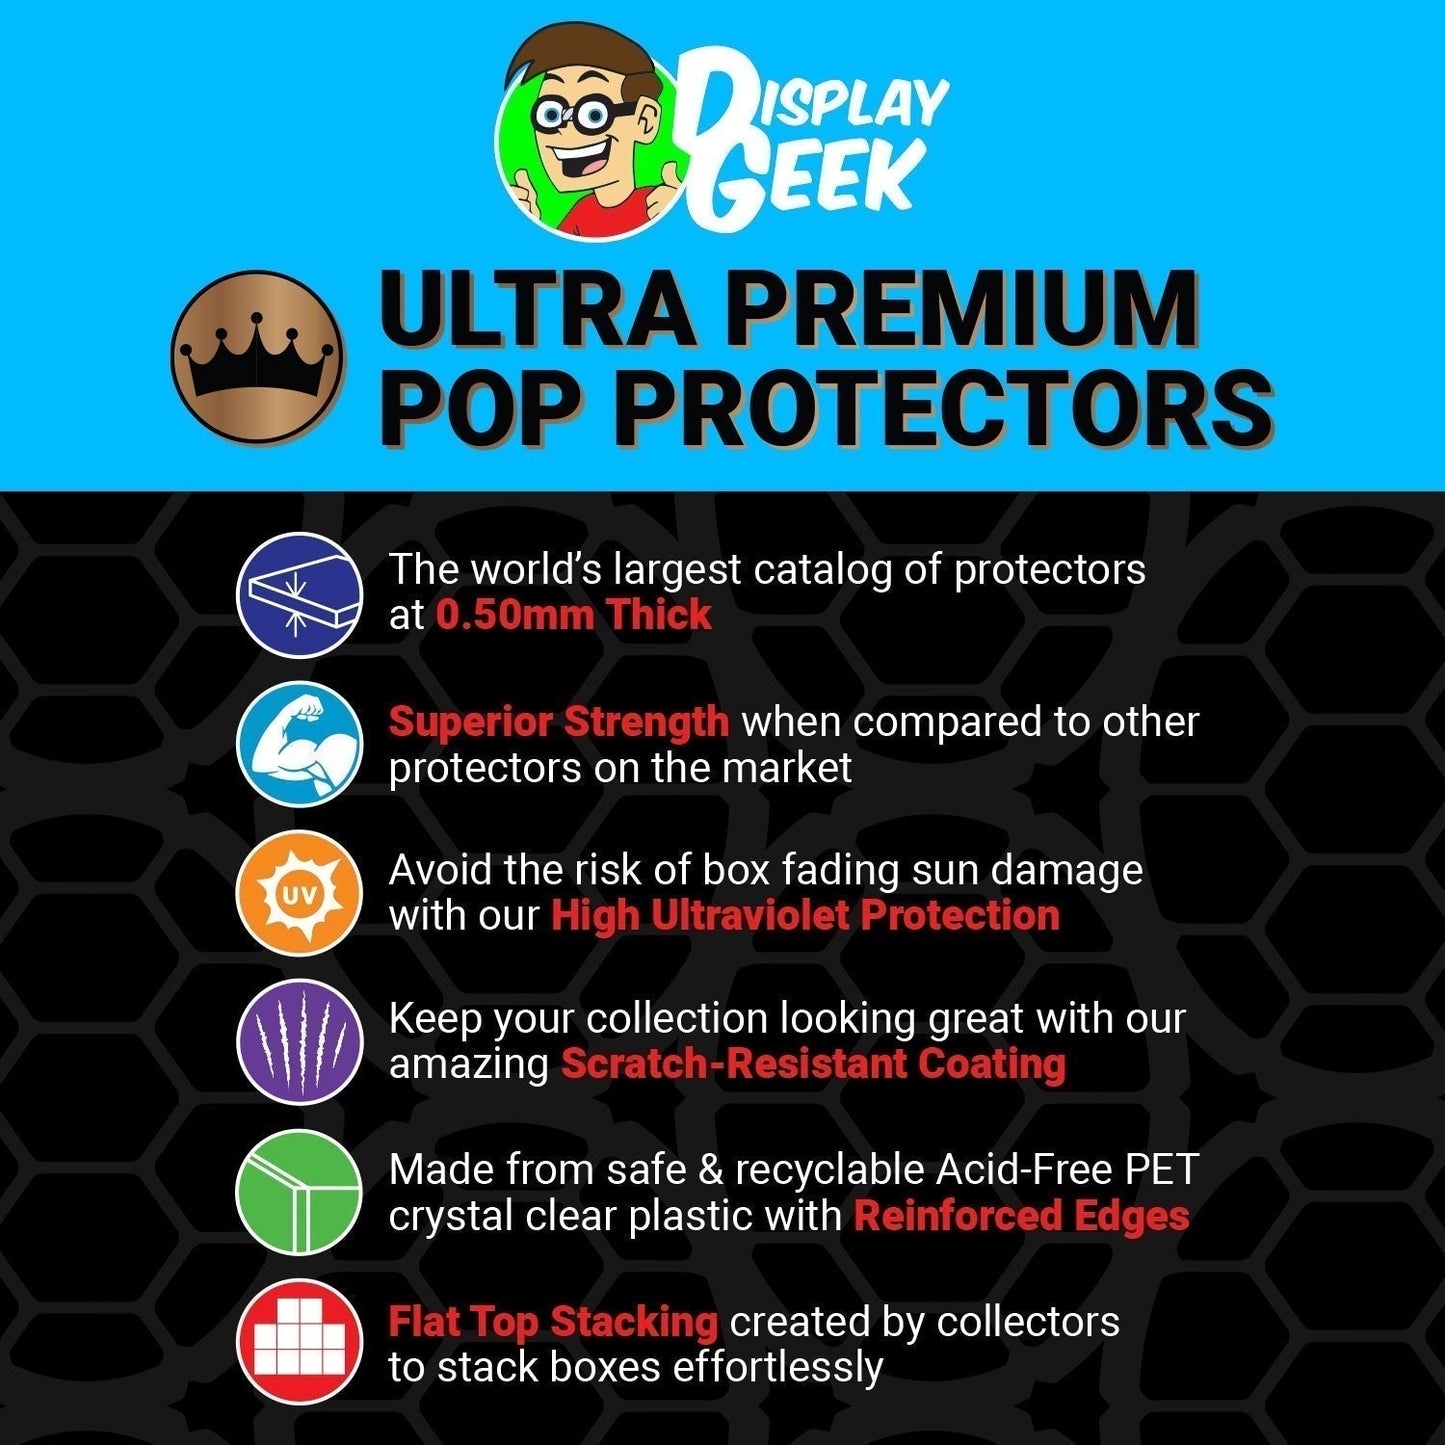 Pop Protector for Pop & Tee Grogu with Cookie Flocked #465 Funko Box - PPG Pop Protector Guide Search Created by Display Geek